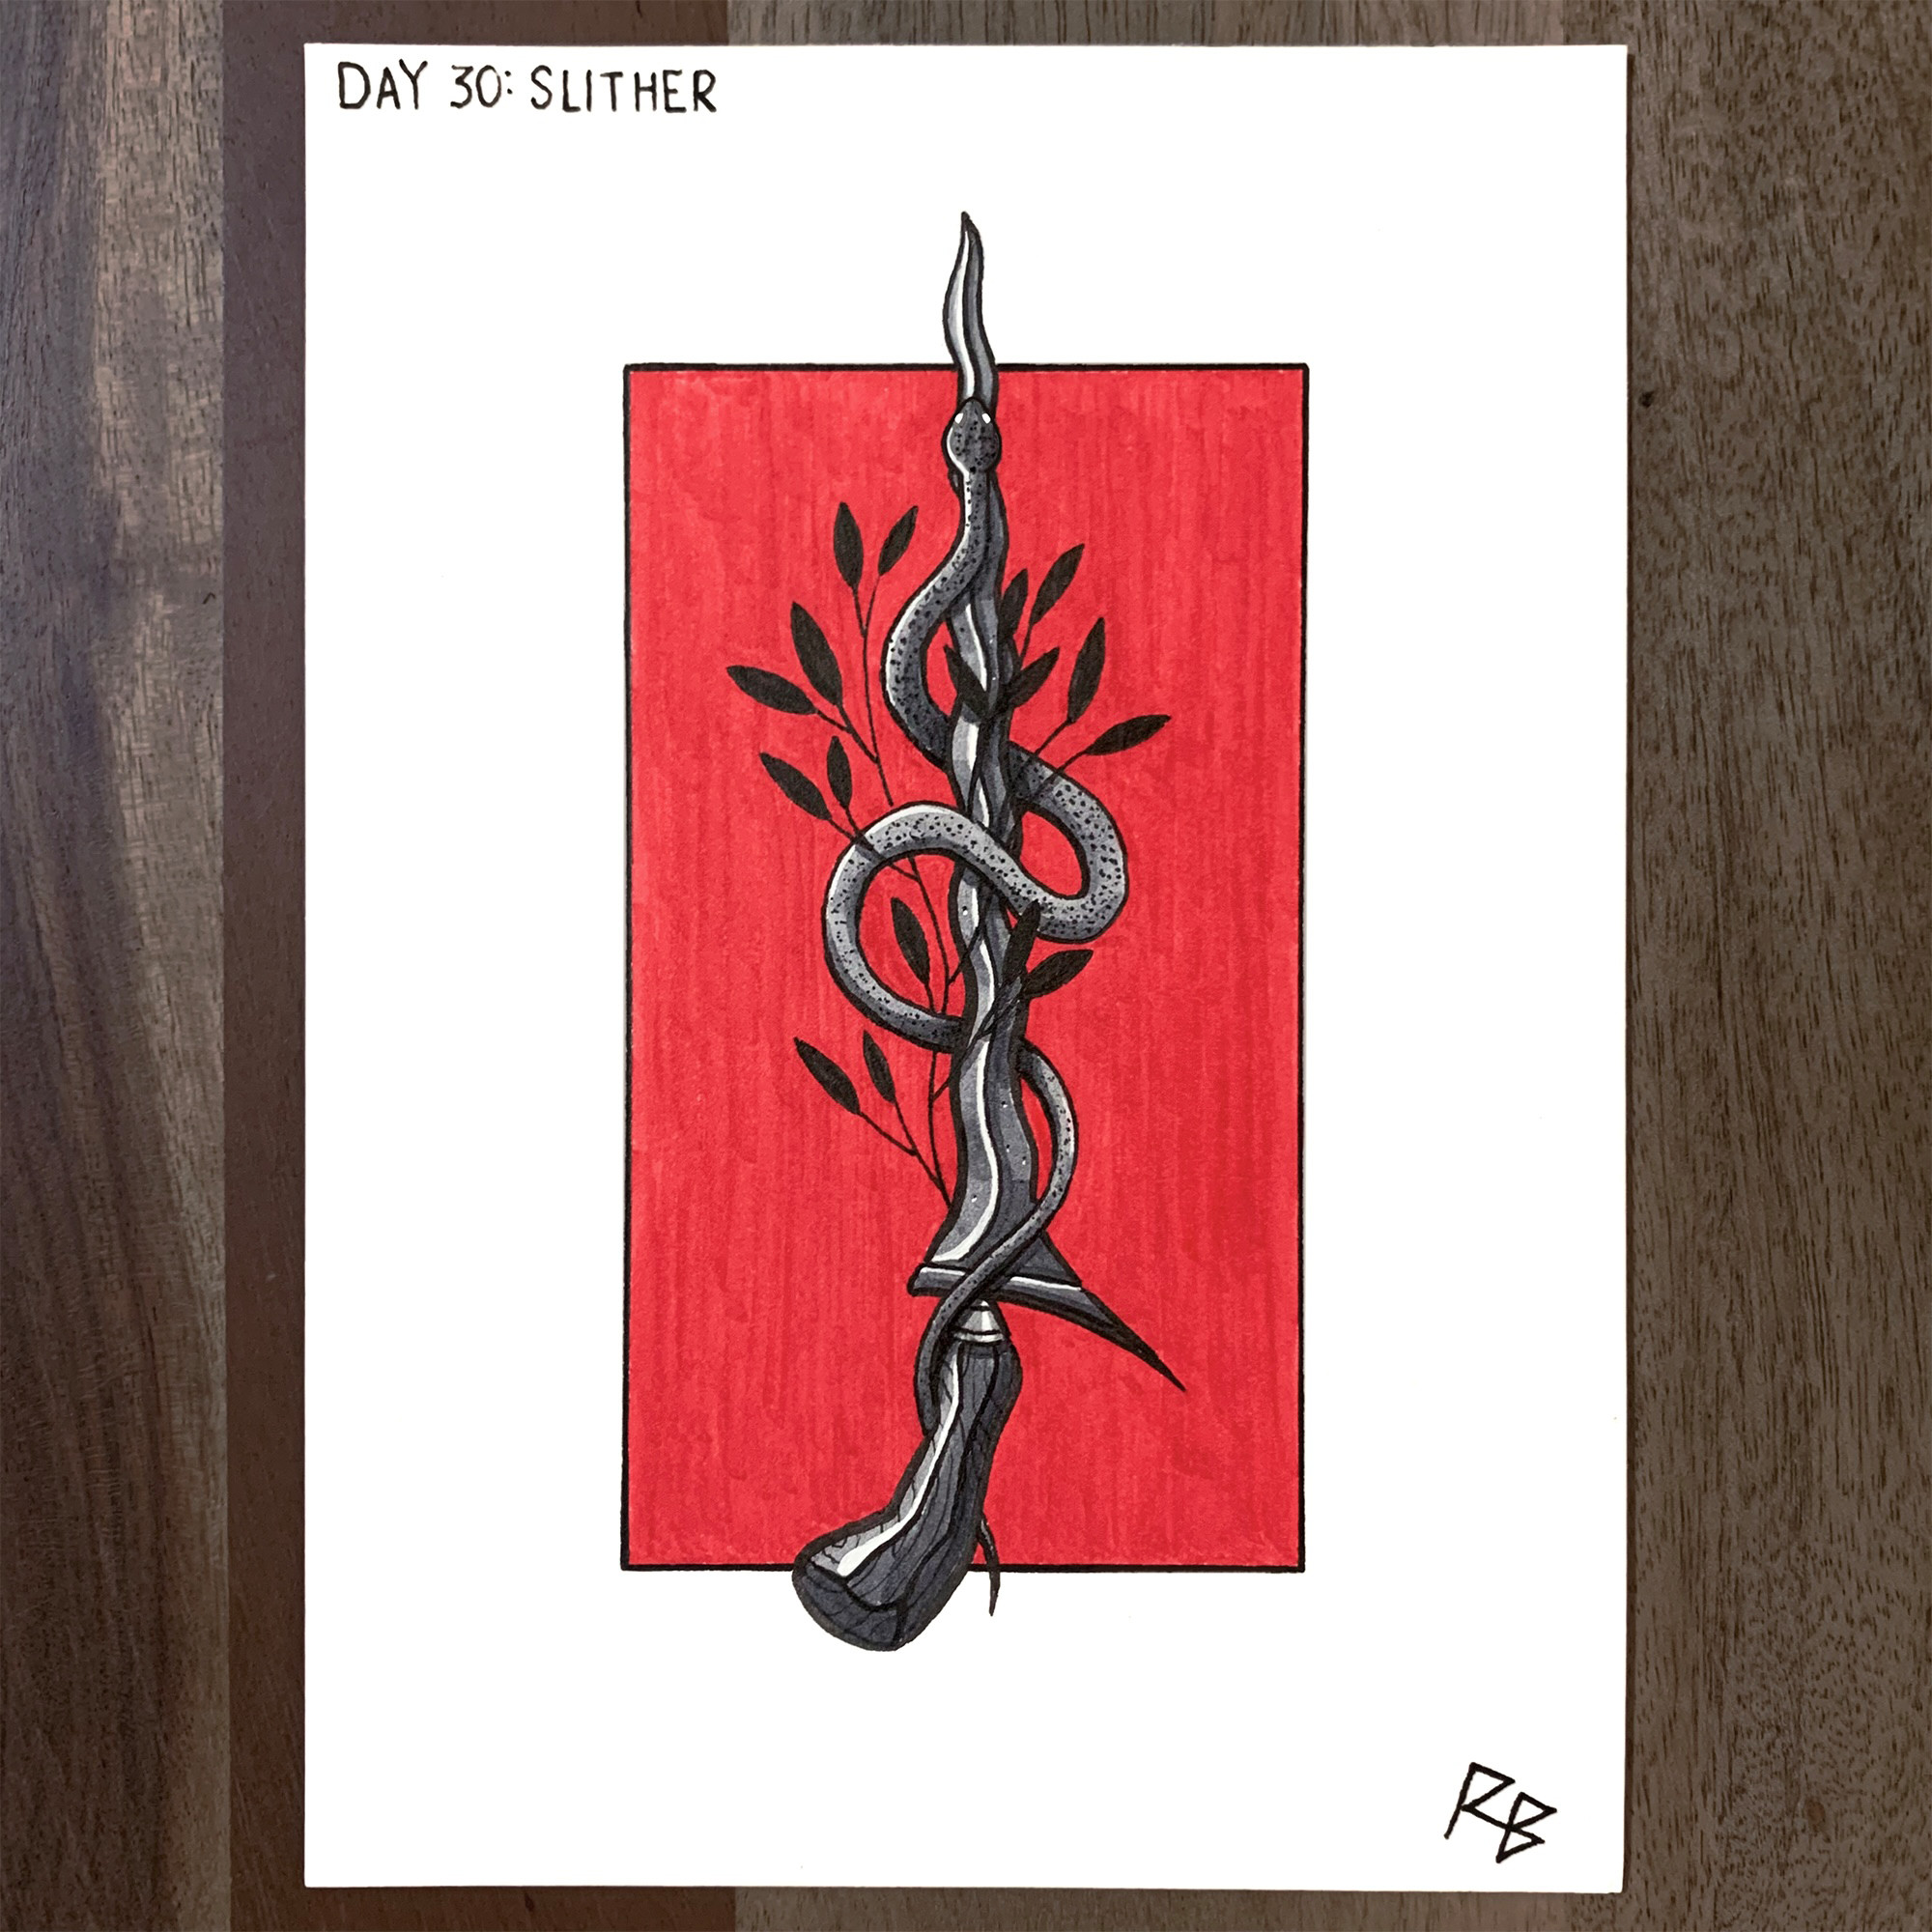 (Day 30: Slither)